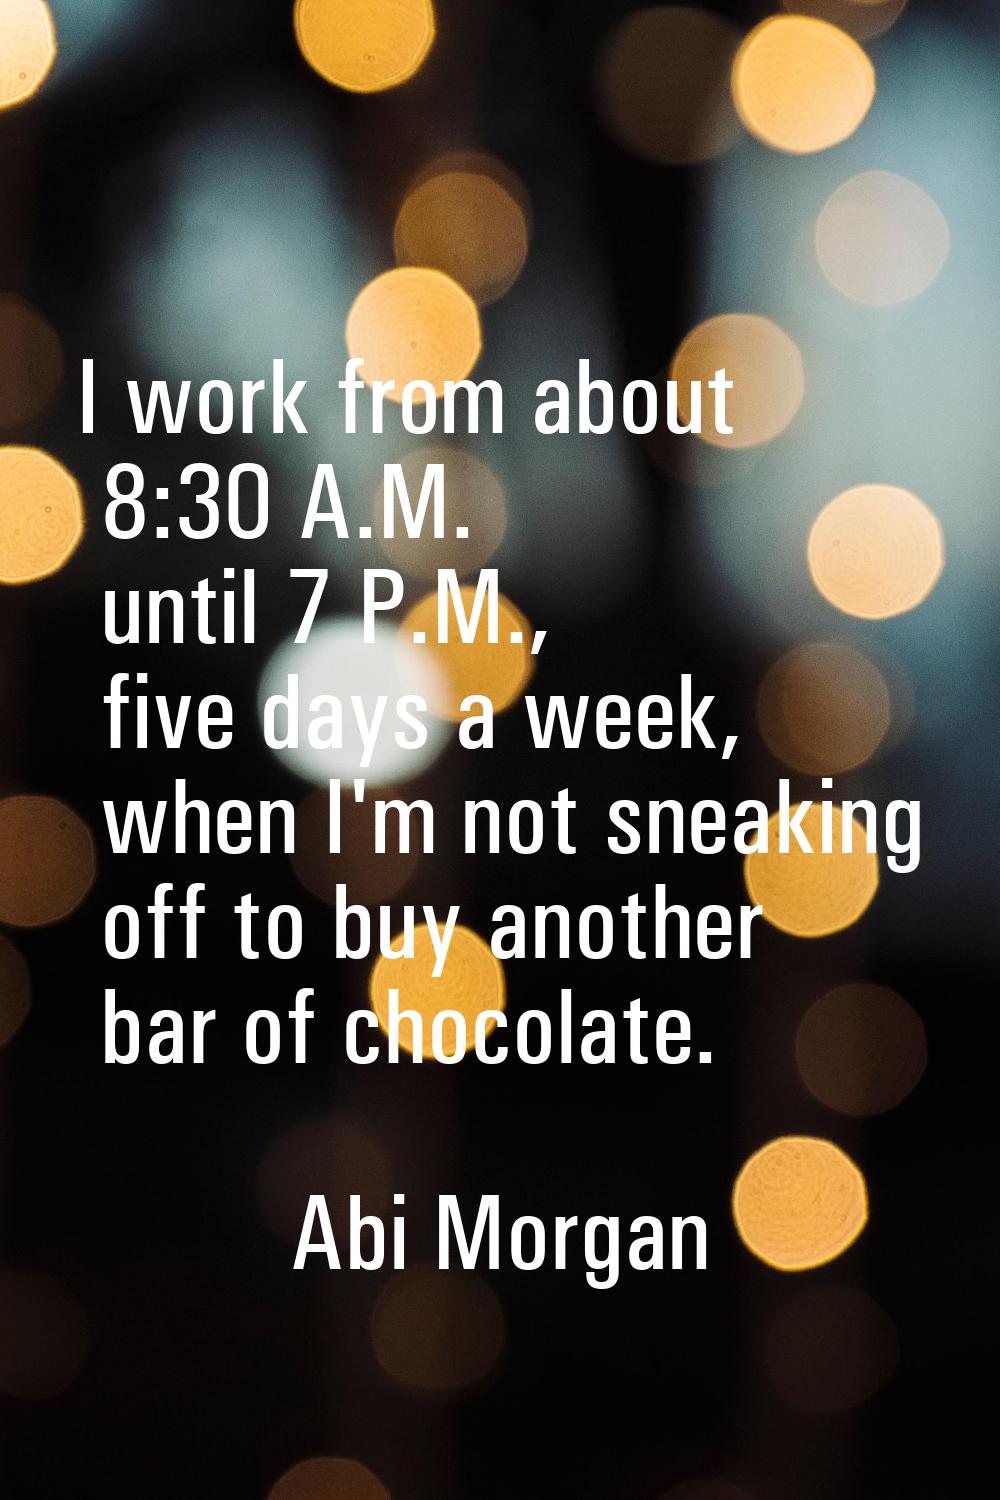 I work from about 8:30 A.M. until 7 P.M., five days a week, when I'm not sneaking off to buy anothe